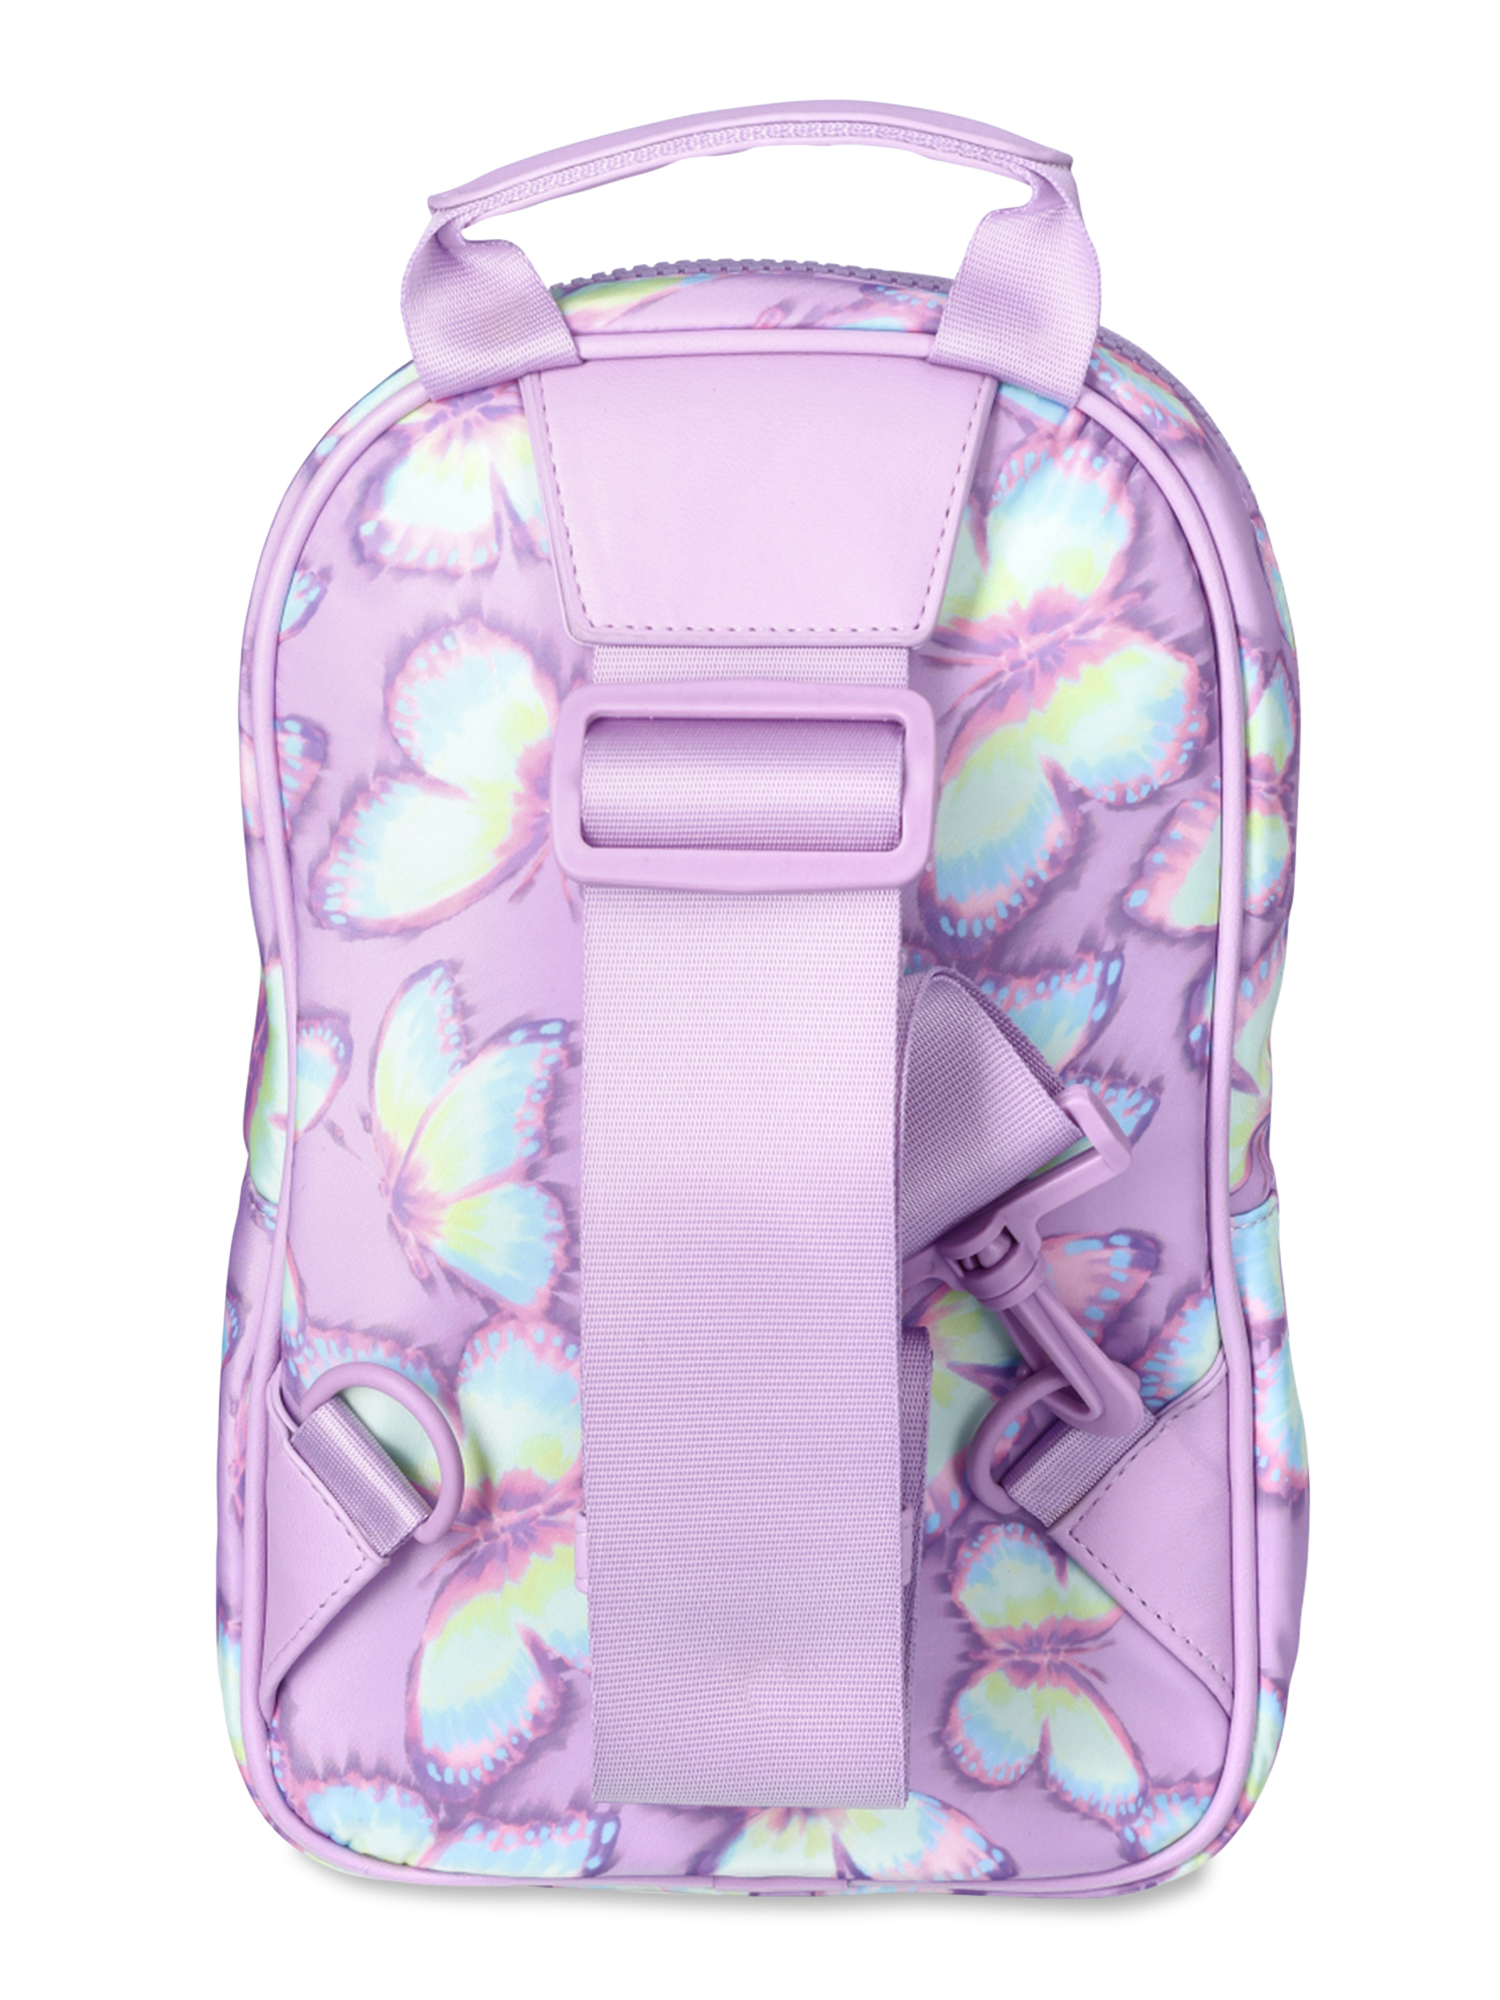 No Boundaries Women's Hands-Free Sling Bag, Lavender Butterfly - image 3 of 6